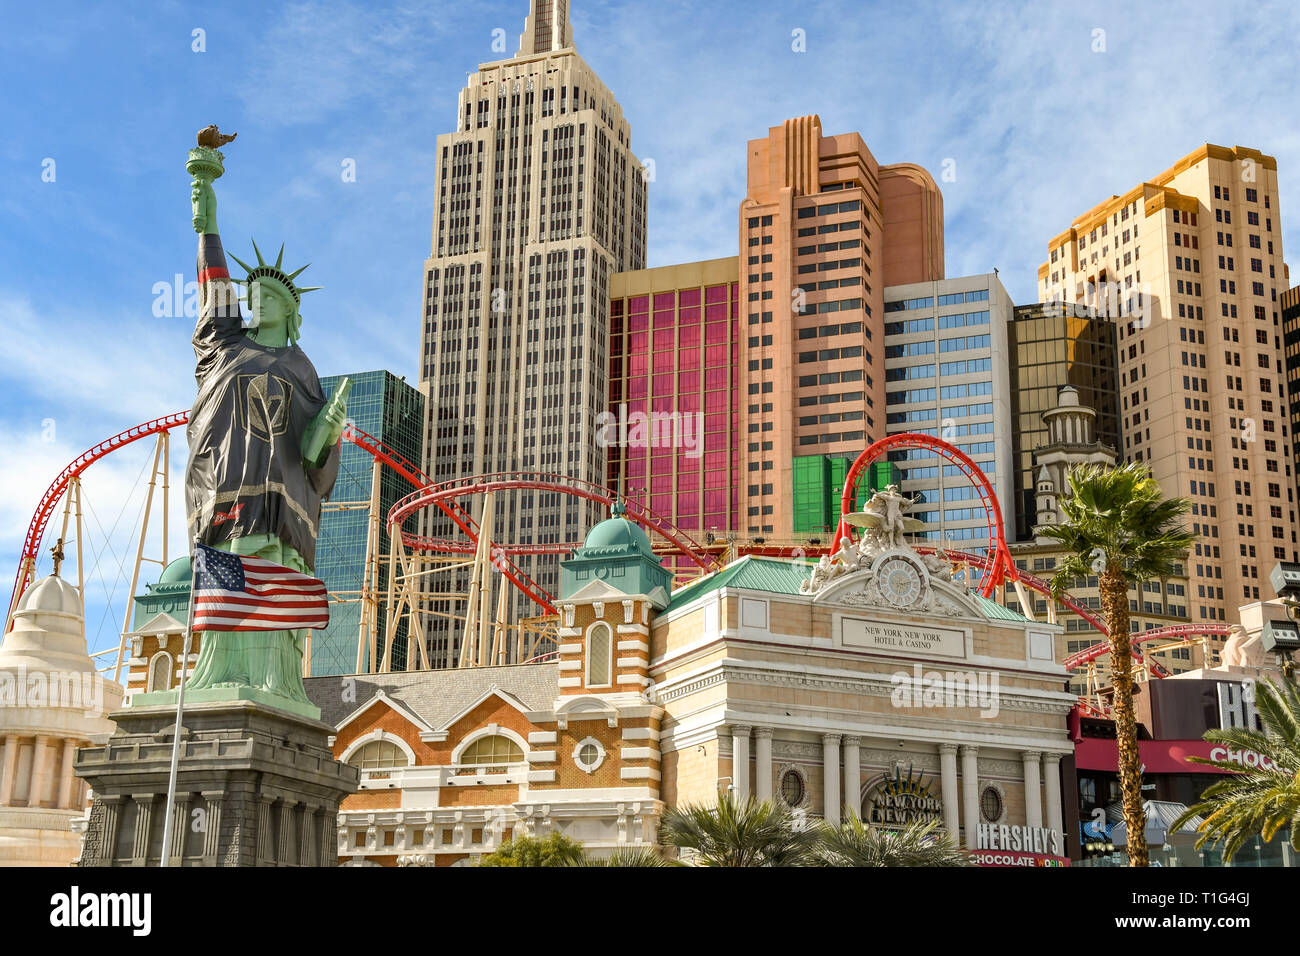 LAS VEGAS, NV, USA - FEBRUARY 2019: Wide angle view of the New York New York Hotel in Las Vegas. It is draped in the shirt of the Golden Knights ice h Stock Photo